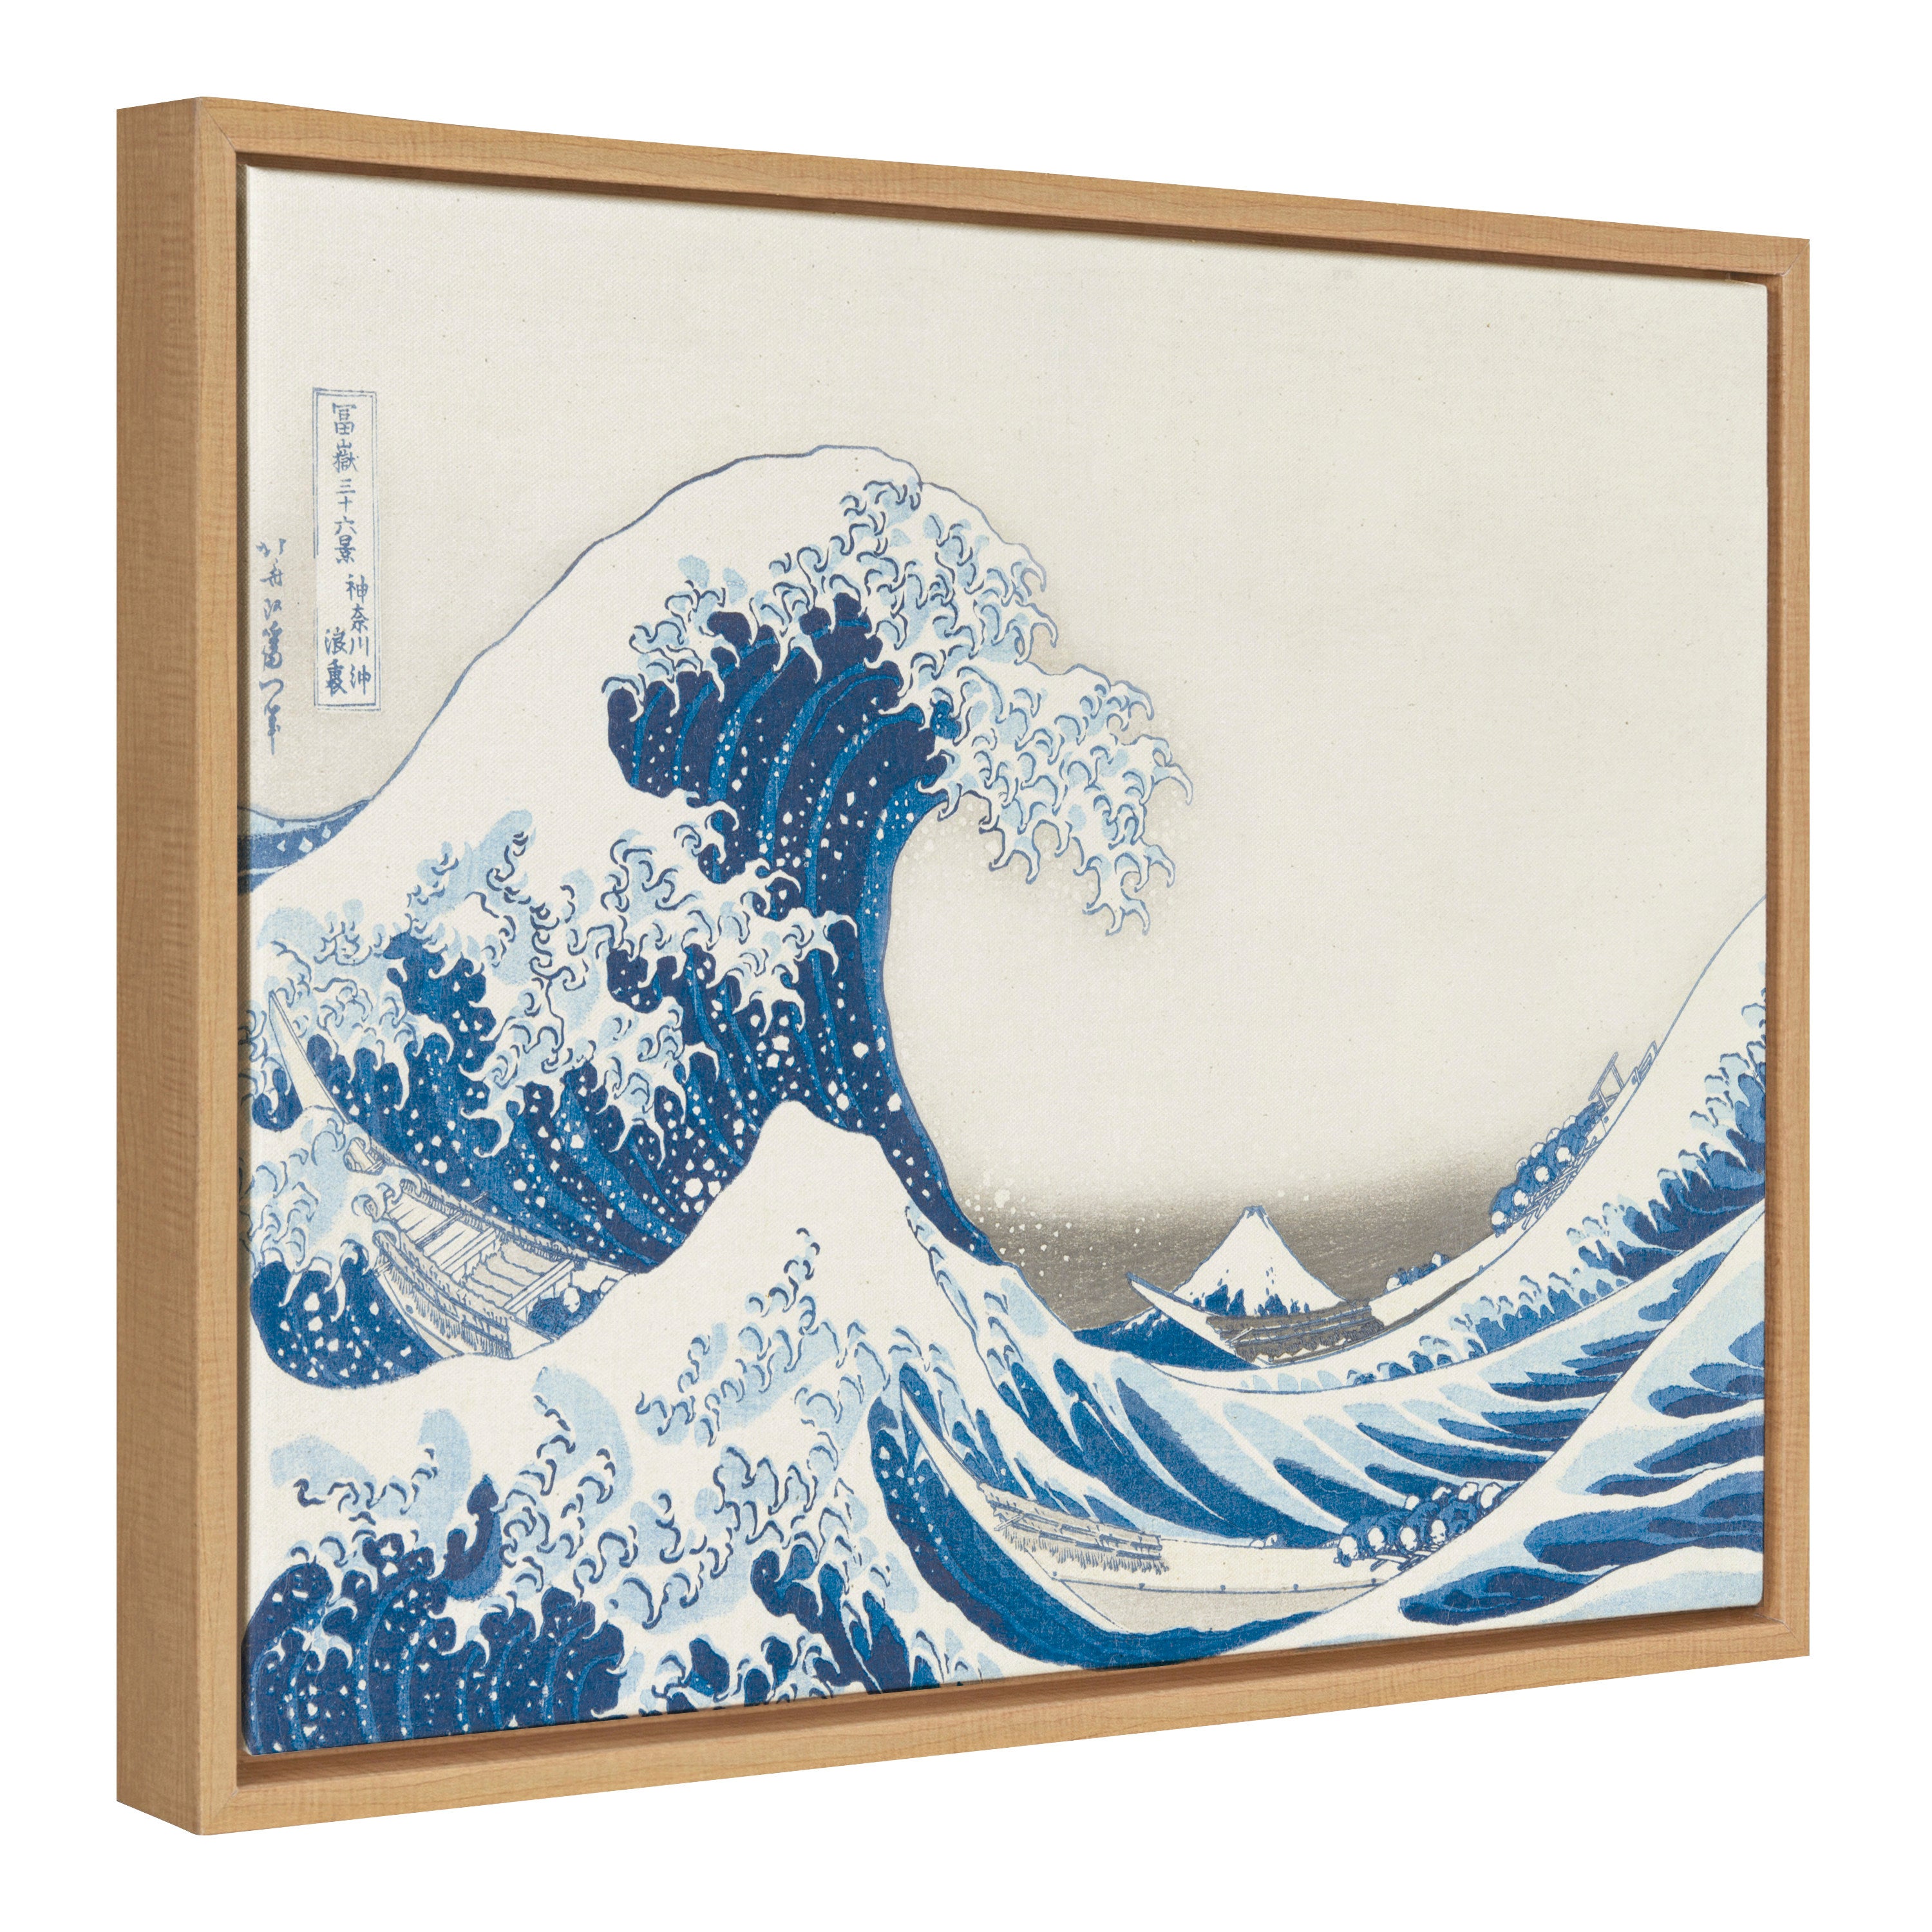 Sylvie Katsushika Hokusai Under the Wave off Kanagawa aka The Great Wave 1830 Framed Canvas by The Art Institute of Chicago